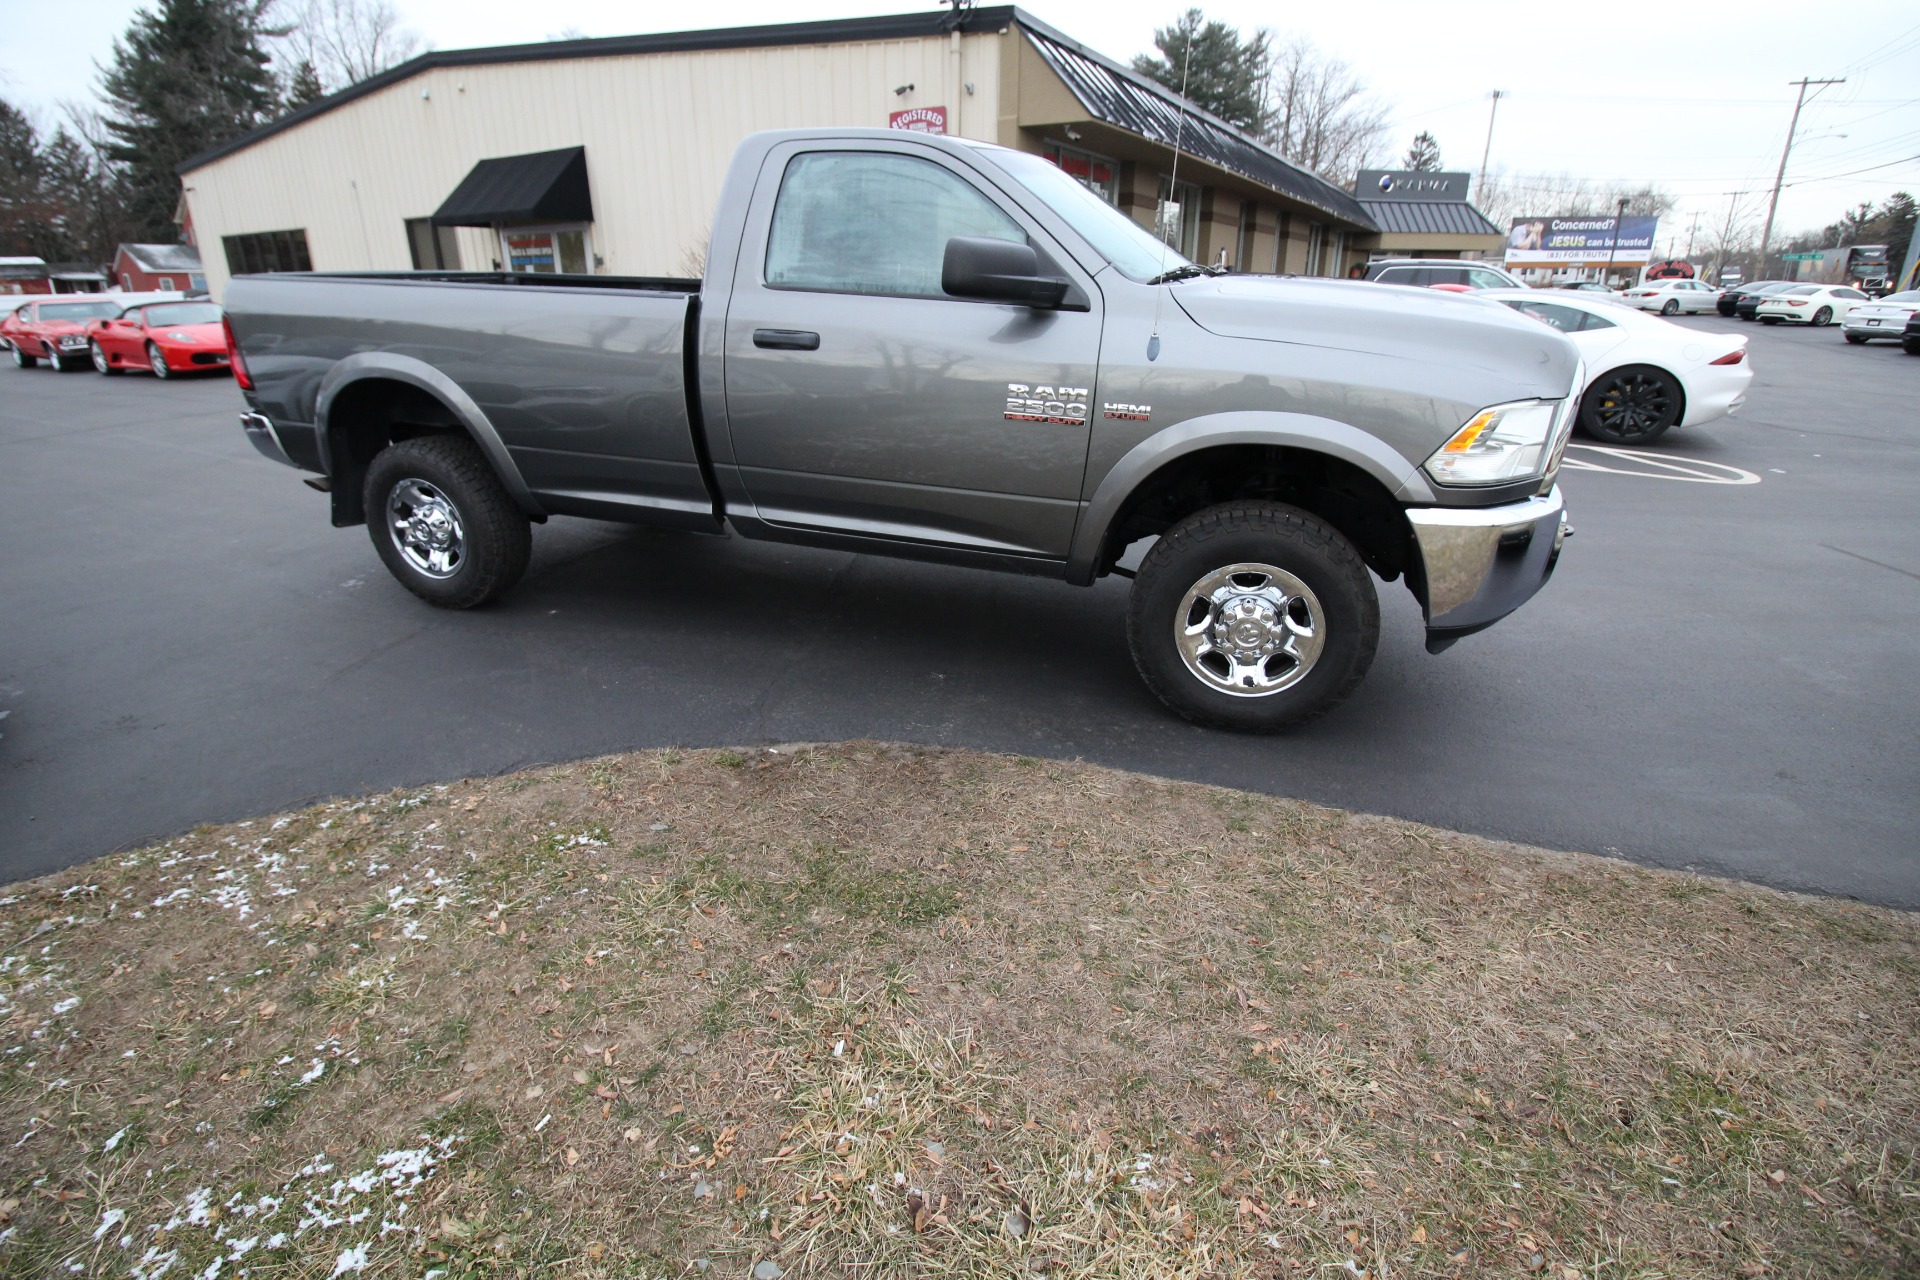 Used 2013 GREY RAM 2500 Tradesman 4WD RARE FIND REGULAR CAB SUPERB CONDITION LOW MILES | Albany, NY